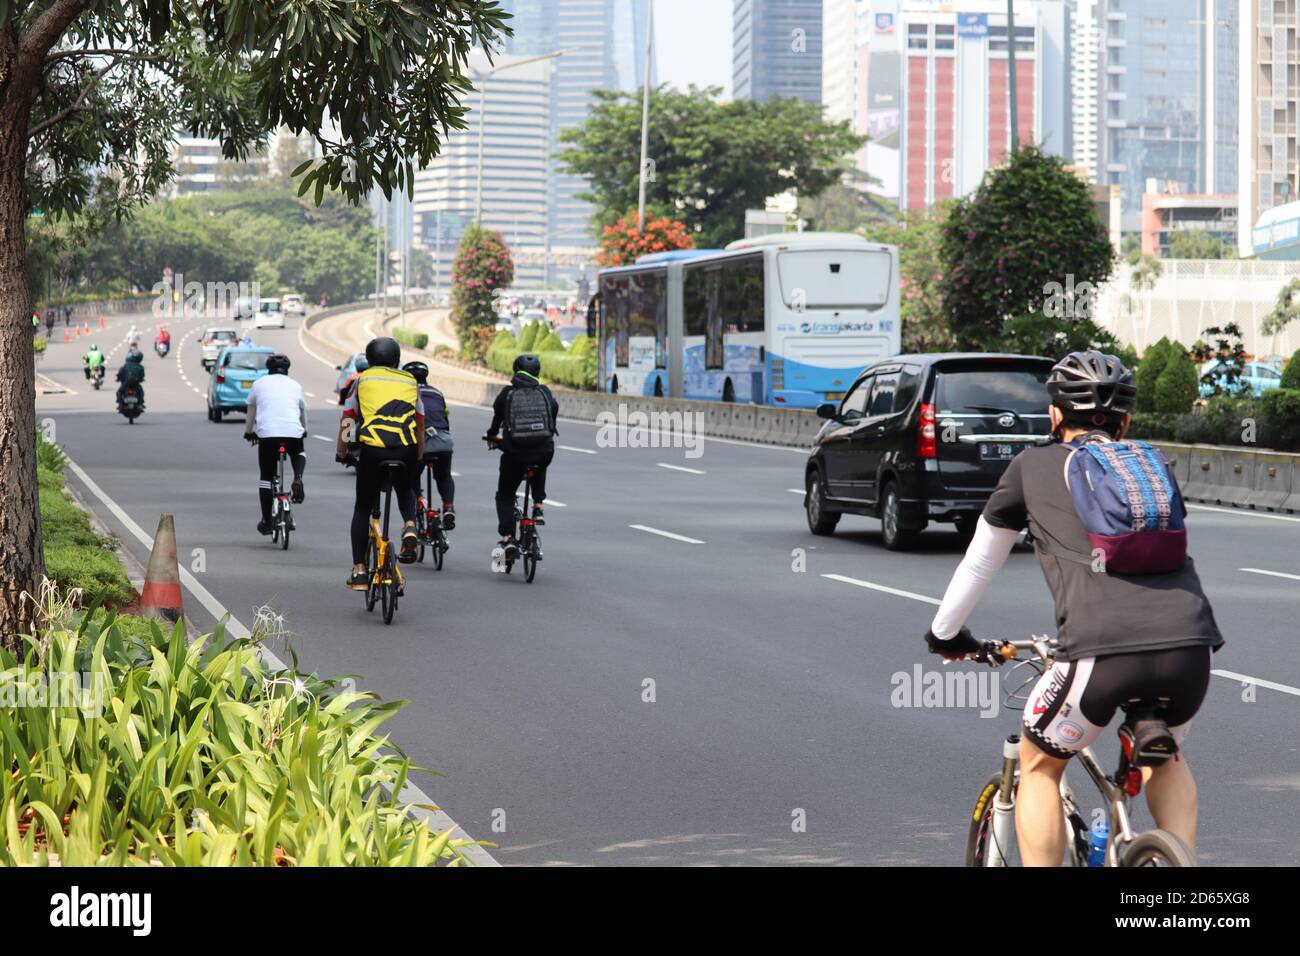 Jakarta / Indonesia - September 5, 2020. Several cyclists are enjoying the free road amid the Covid-19 pandemic Stock Photo